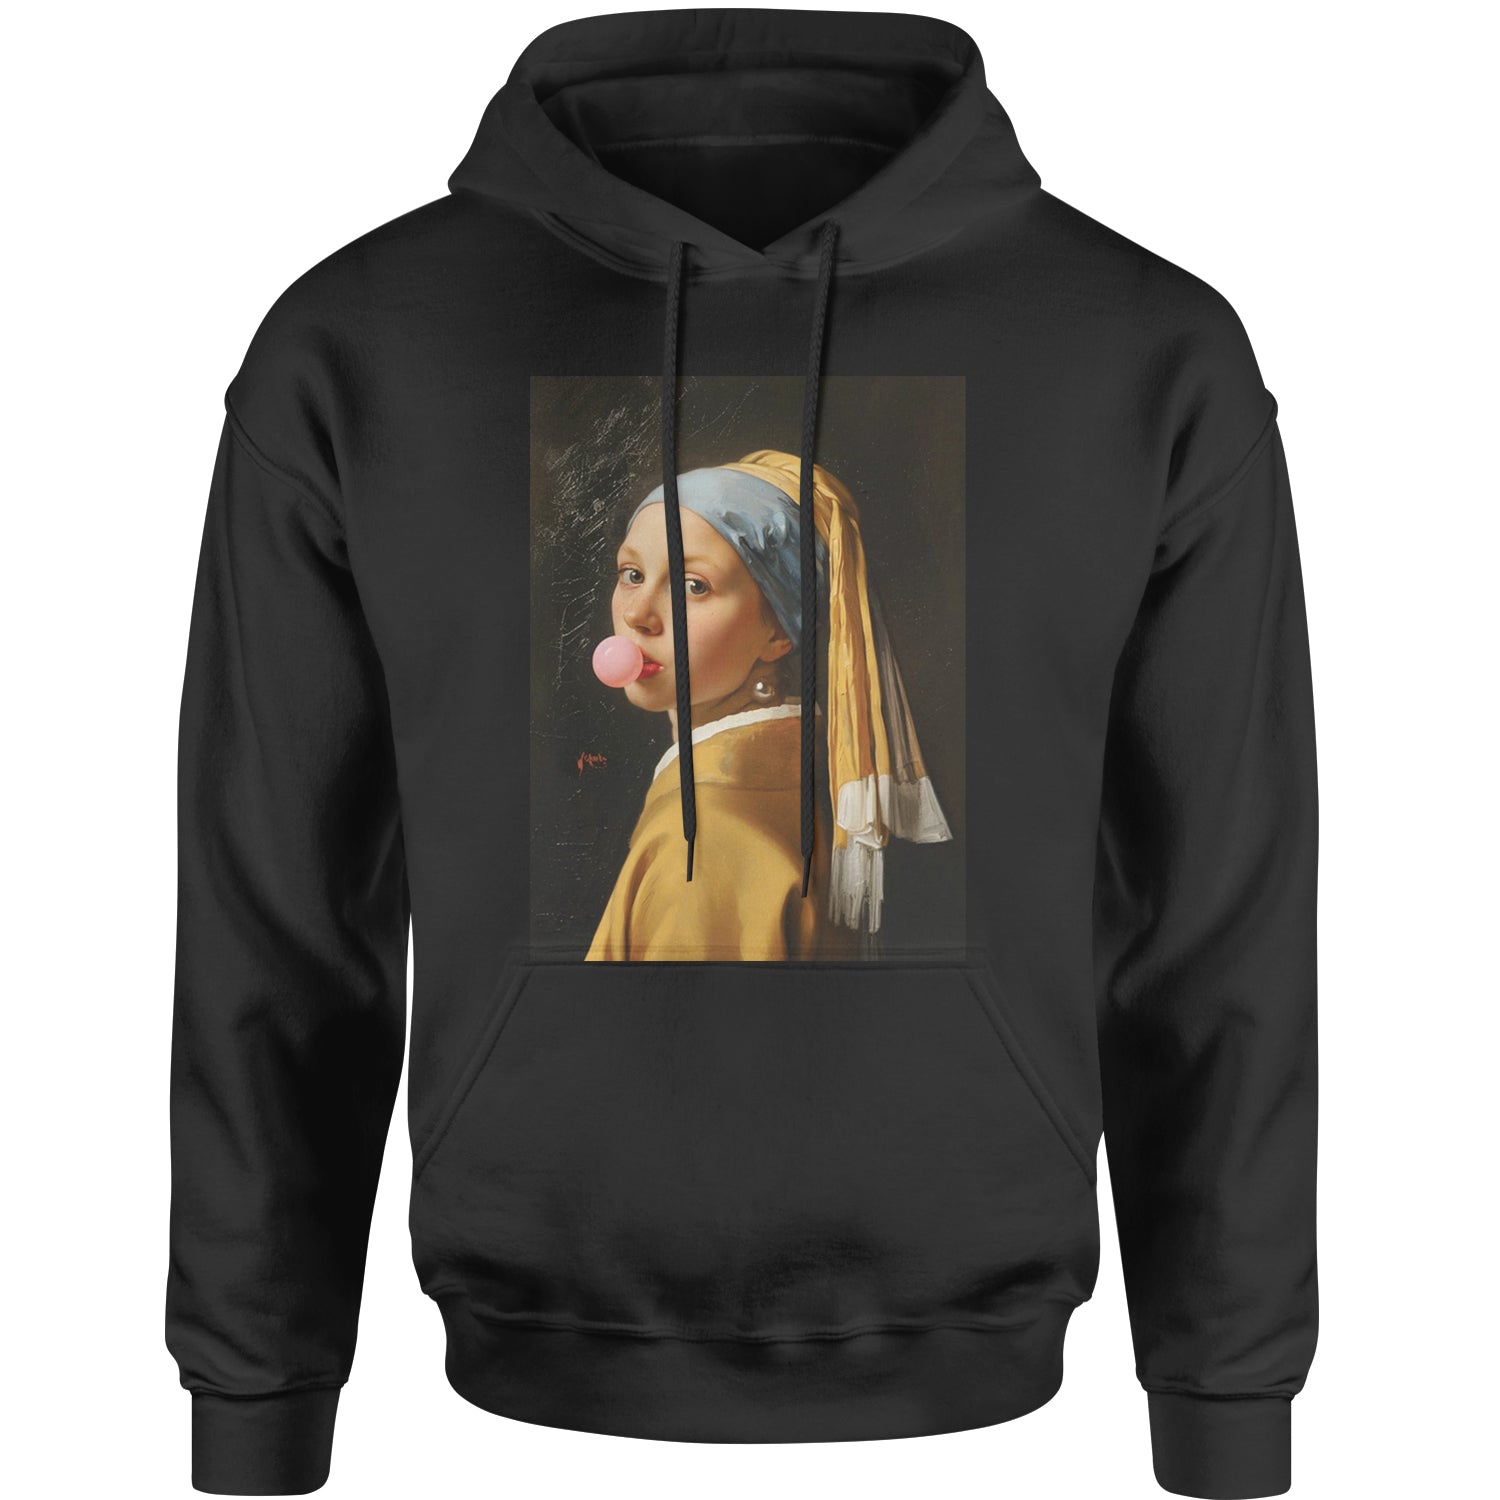 Girl with a Pearl Earring Bubble Gum Contemporary Art Adult Hoodie Sweatshirt